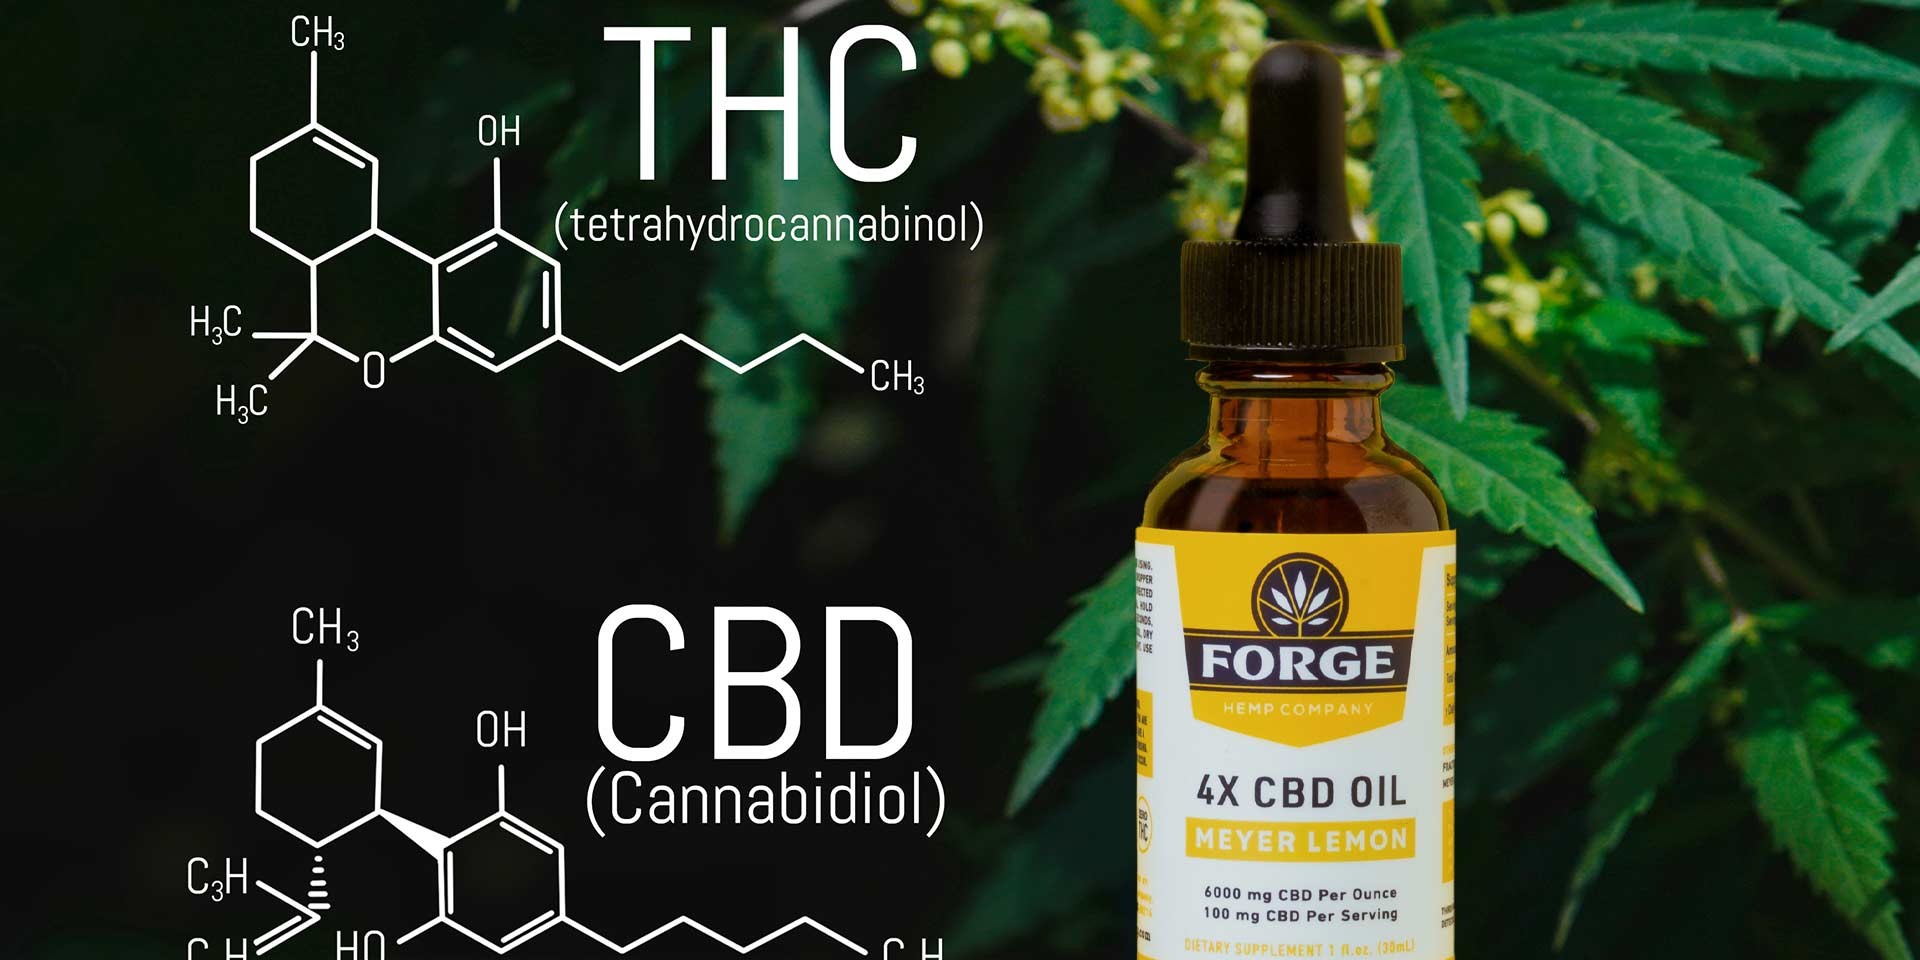 the compounds oof thc and cbd next to Forge Hemp cbd tincture